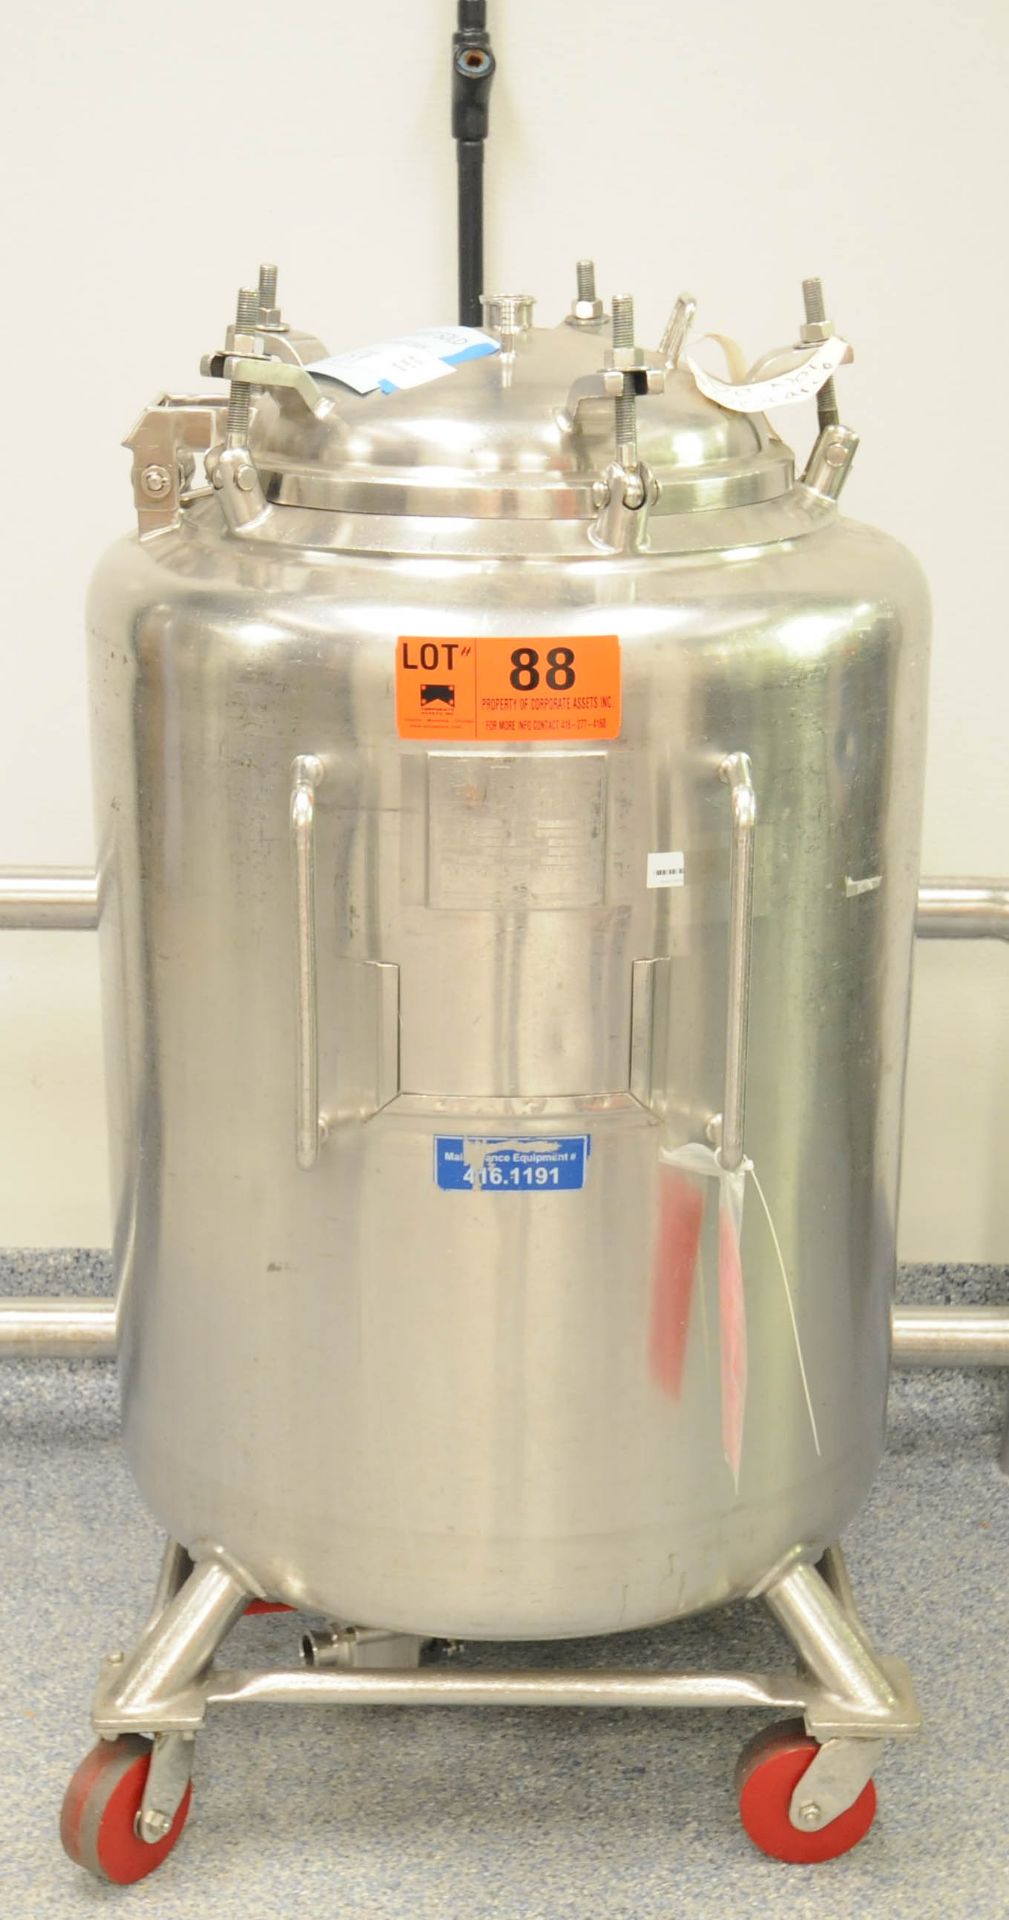 PRECISION STAINLESS (R&R 2012) 104742 PORTABLE SINGLE WALL STAINLESS STEEL TANK WITH 360 LITER CAP